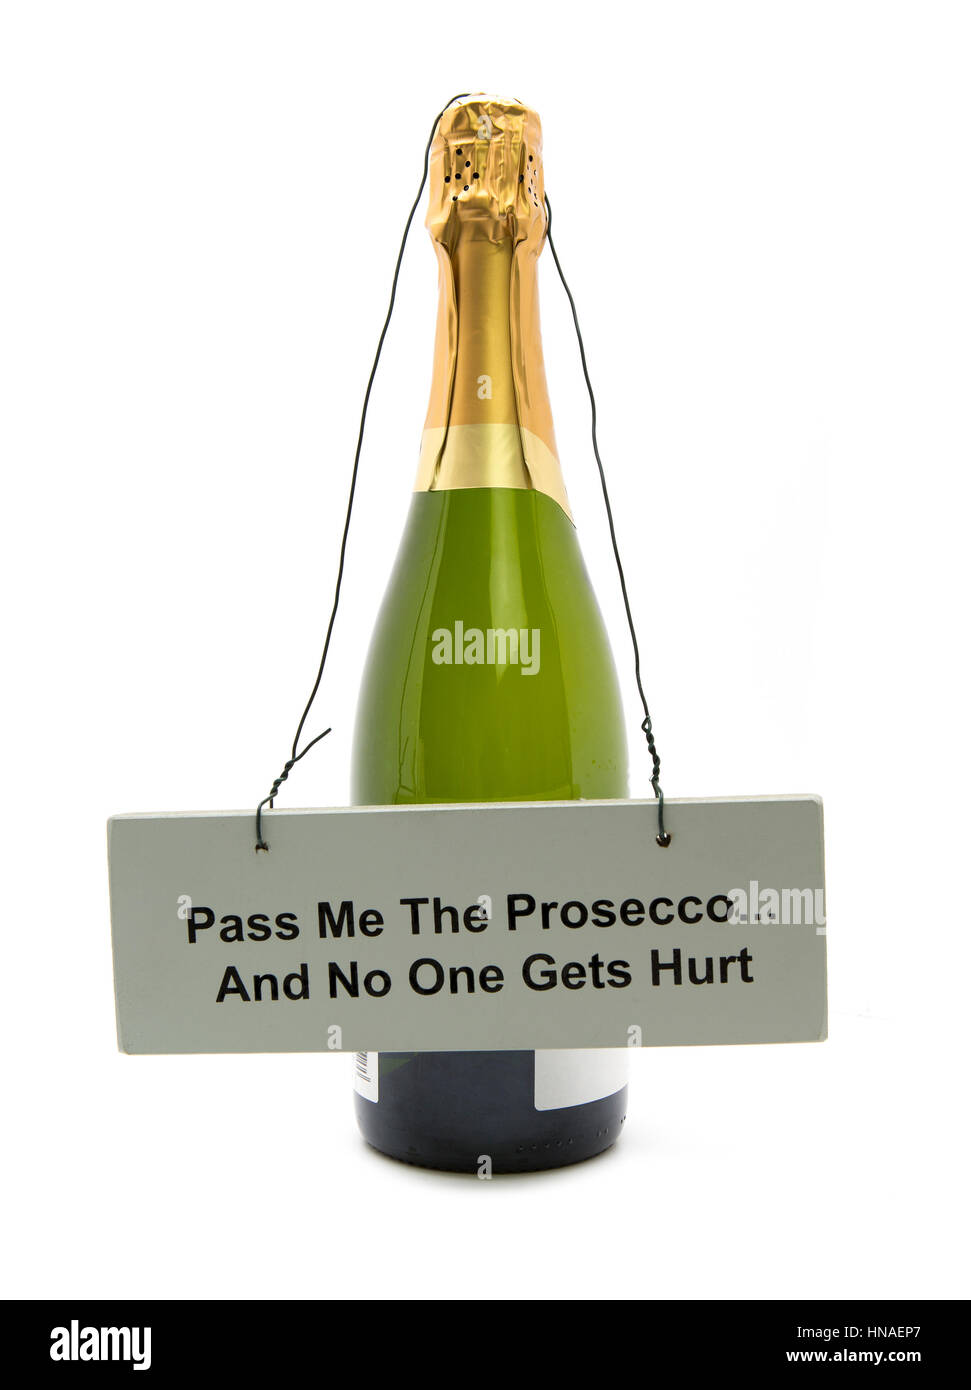 Bottle of Prosecco with a sign saying Passme the Prosecco and no one gets hurt on a white background Stock Photo